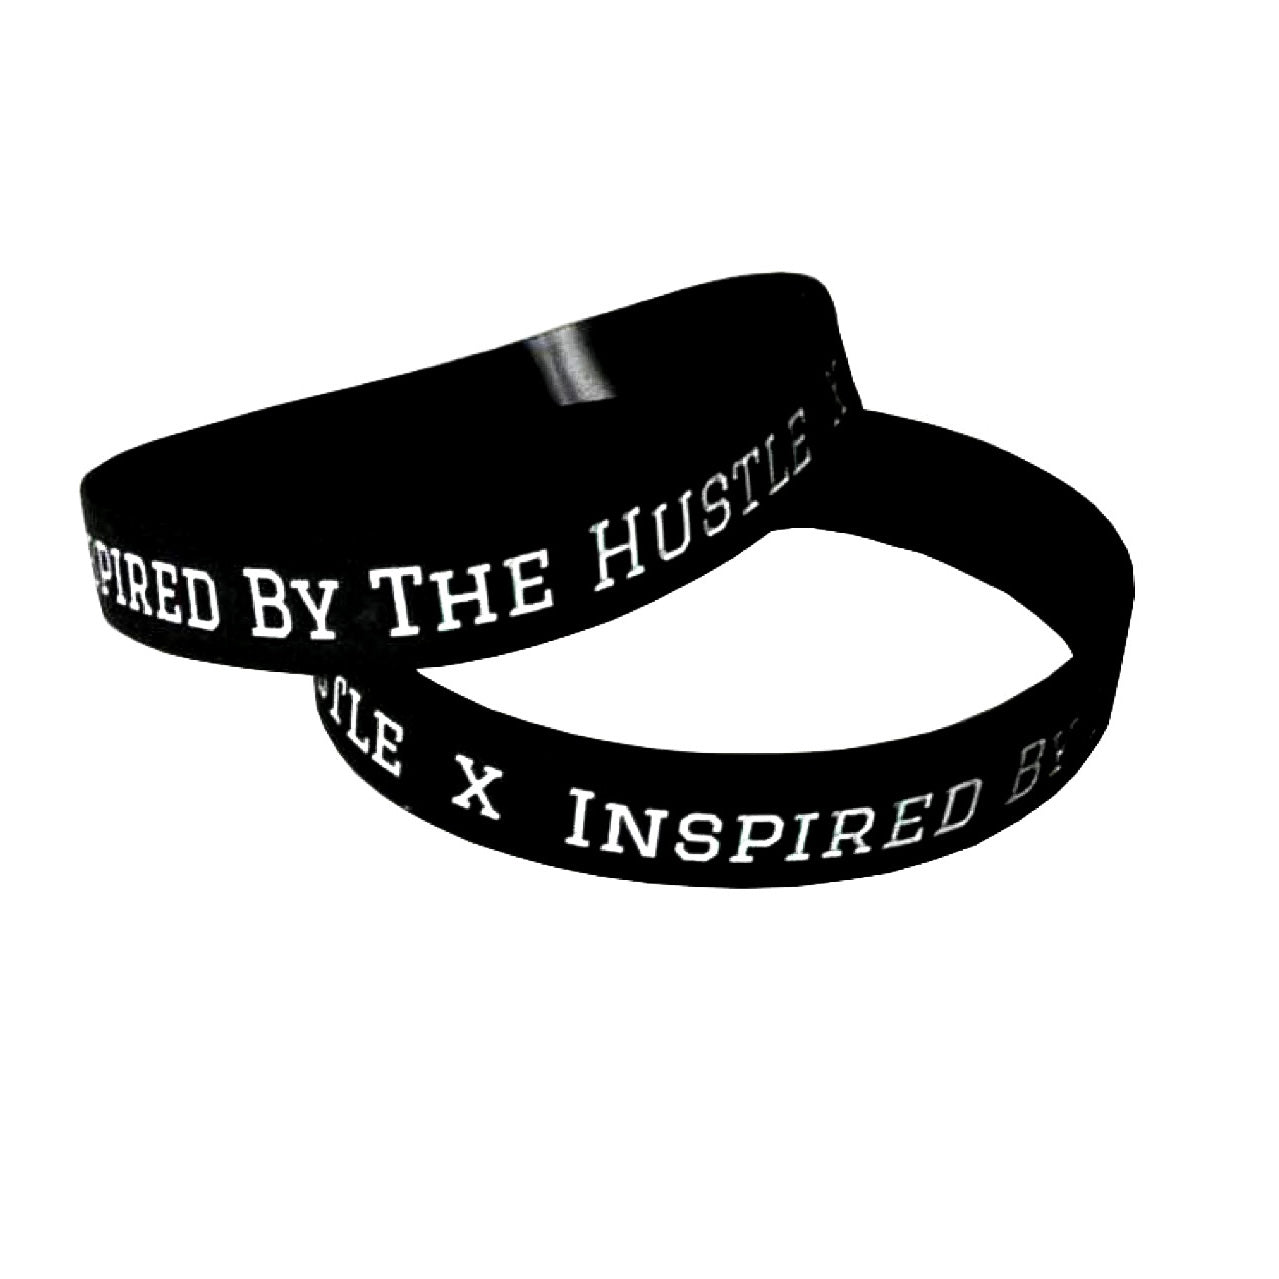 INSPIRED BY THE HUSTLE WRIST BAND